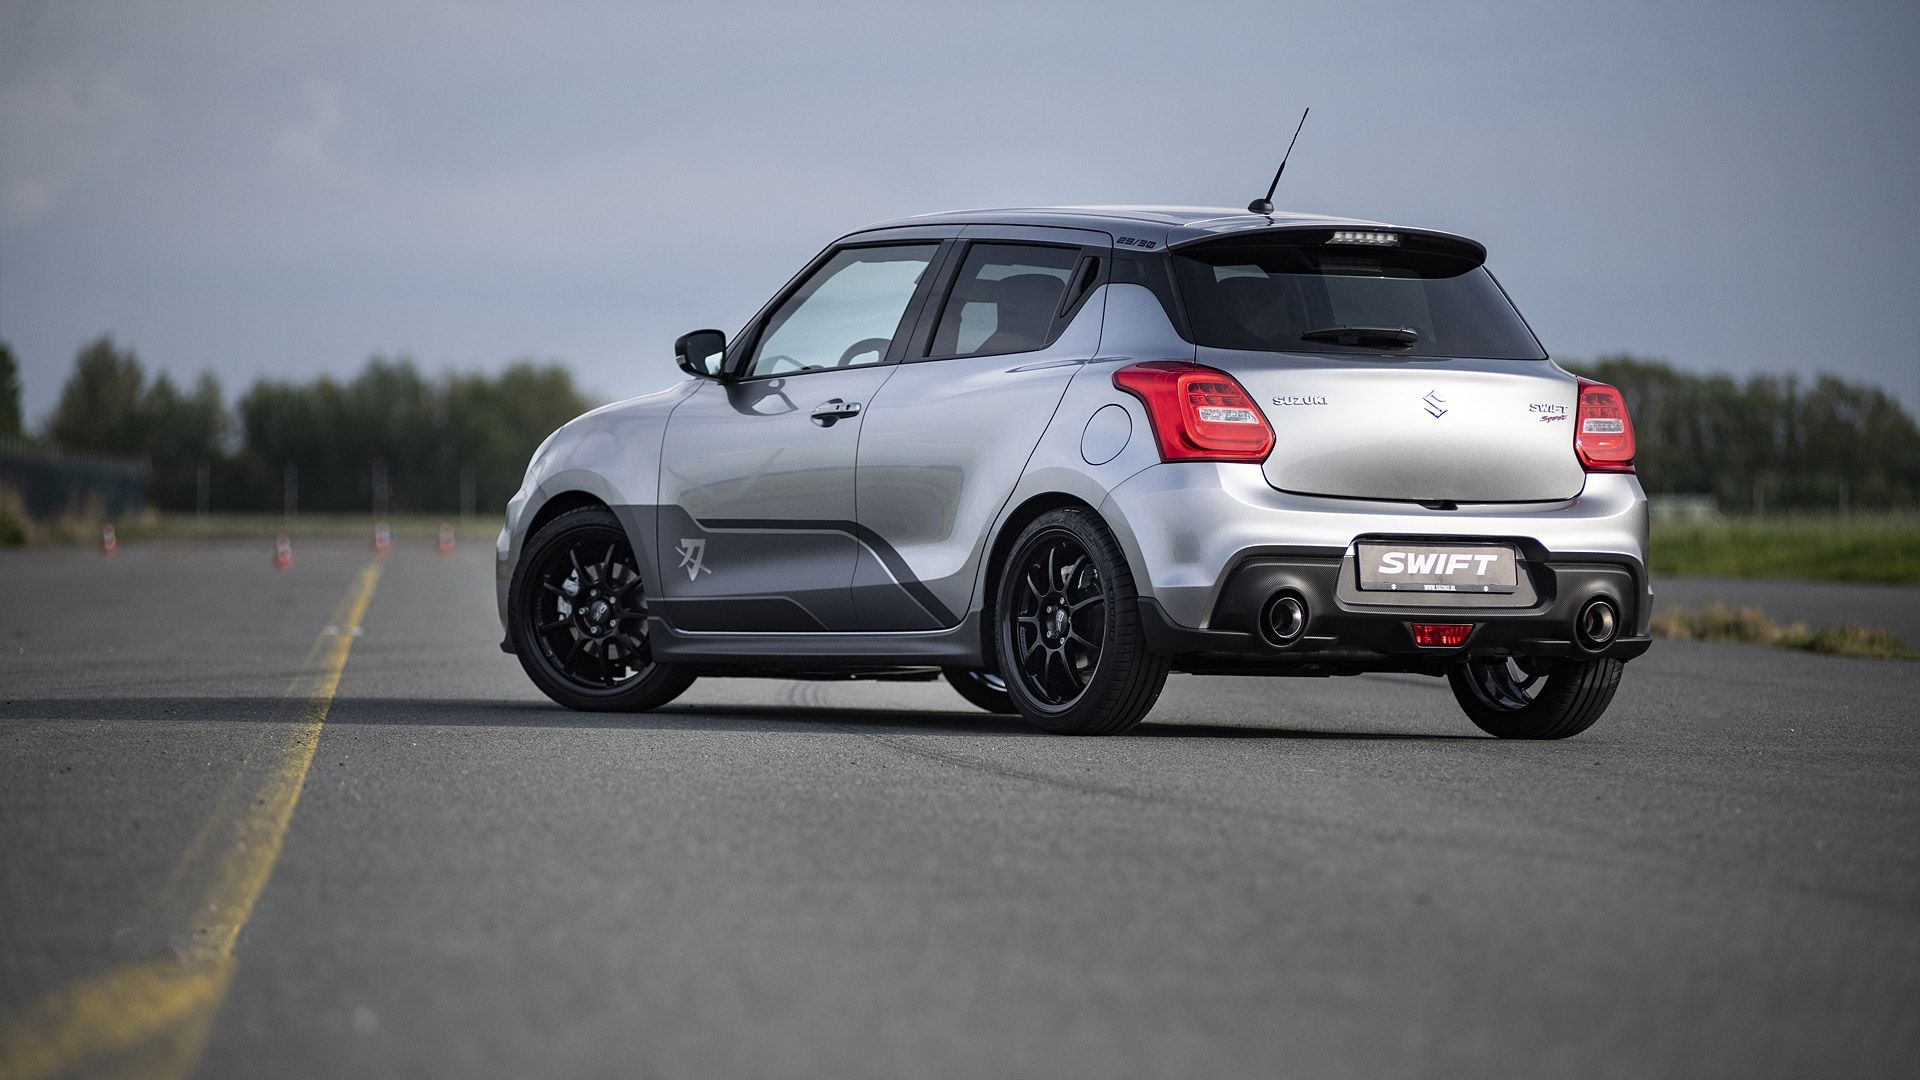 Suzuki Swift, Japanese engineering, Stylish and reliable, Top choice for drivers, 1920x1080 Full HD Desktop